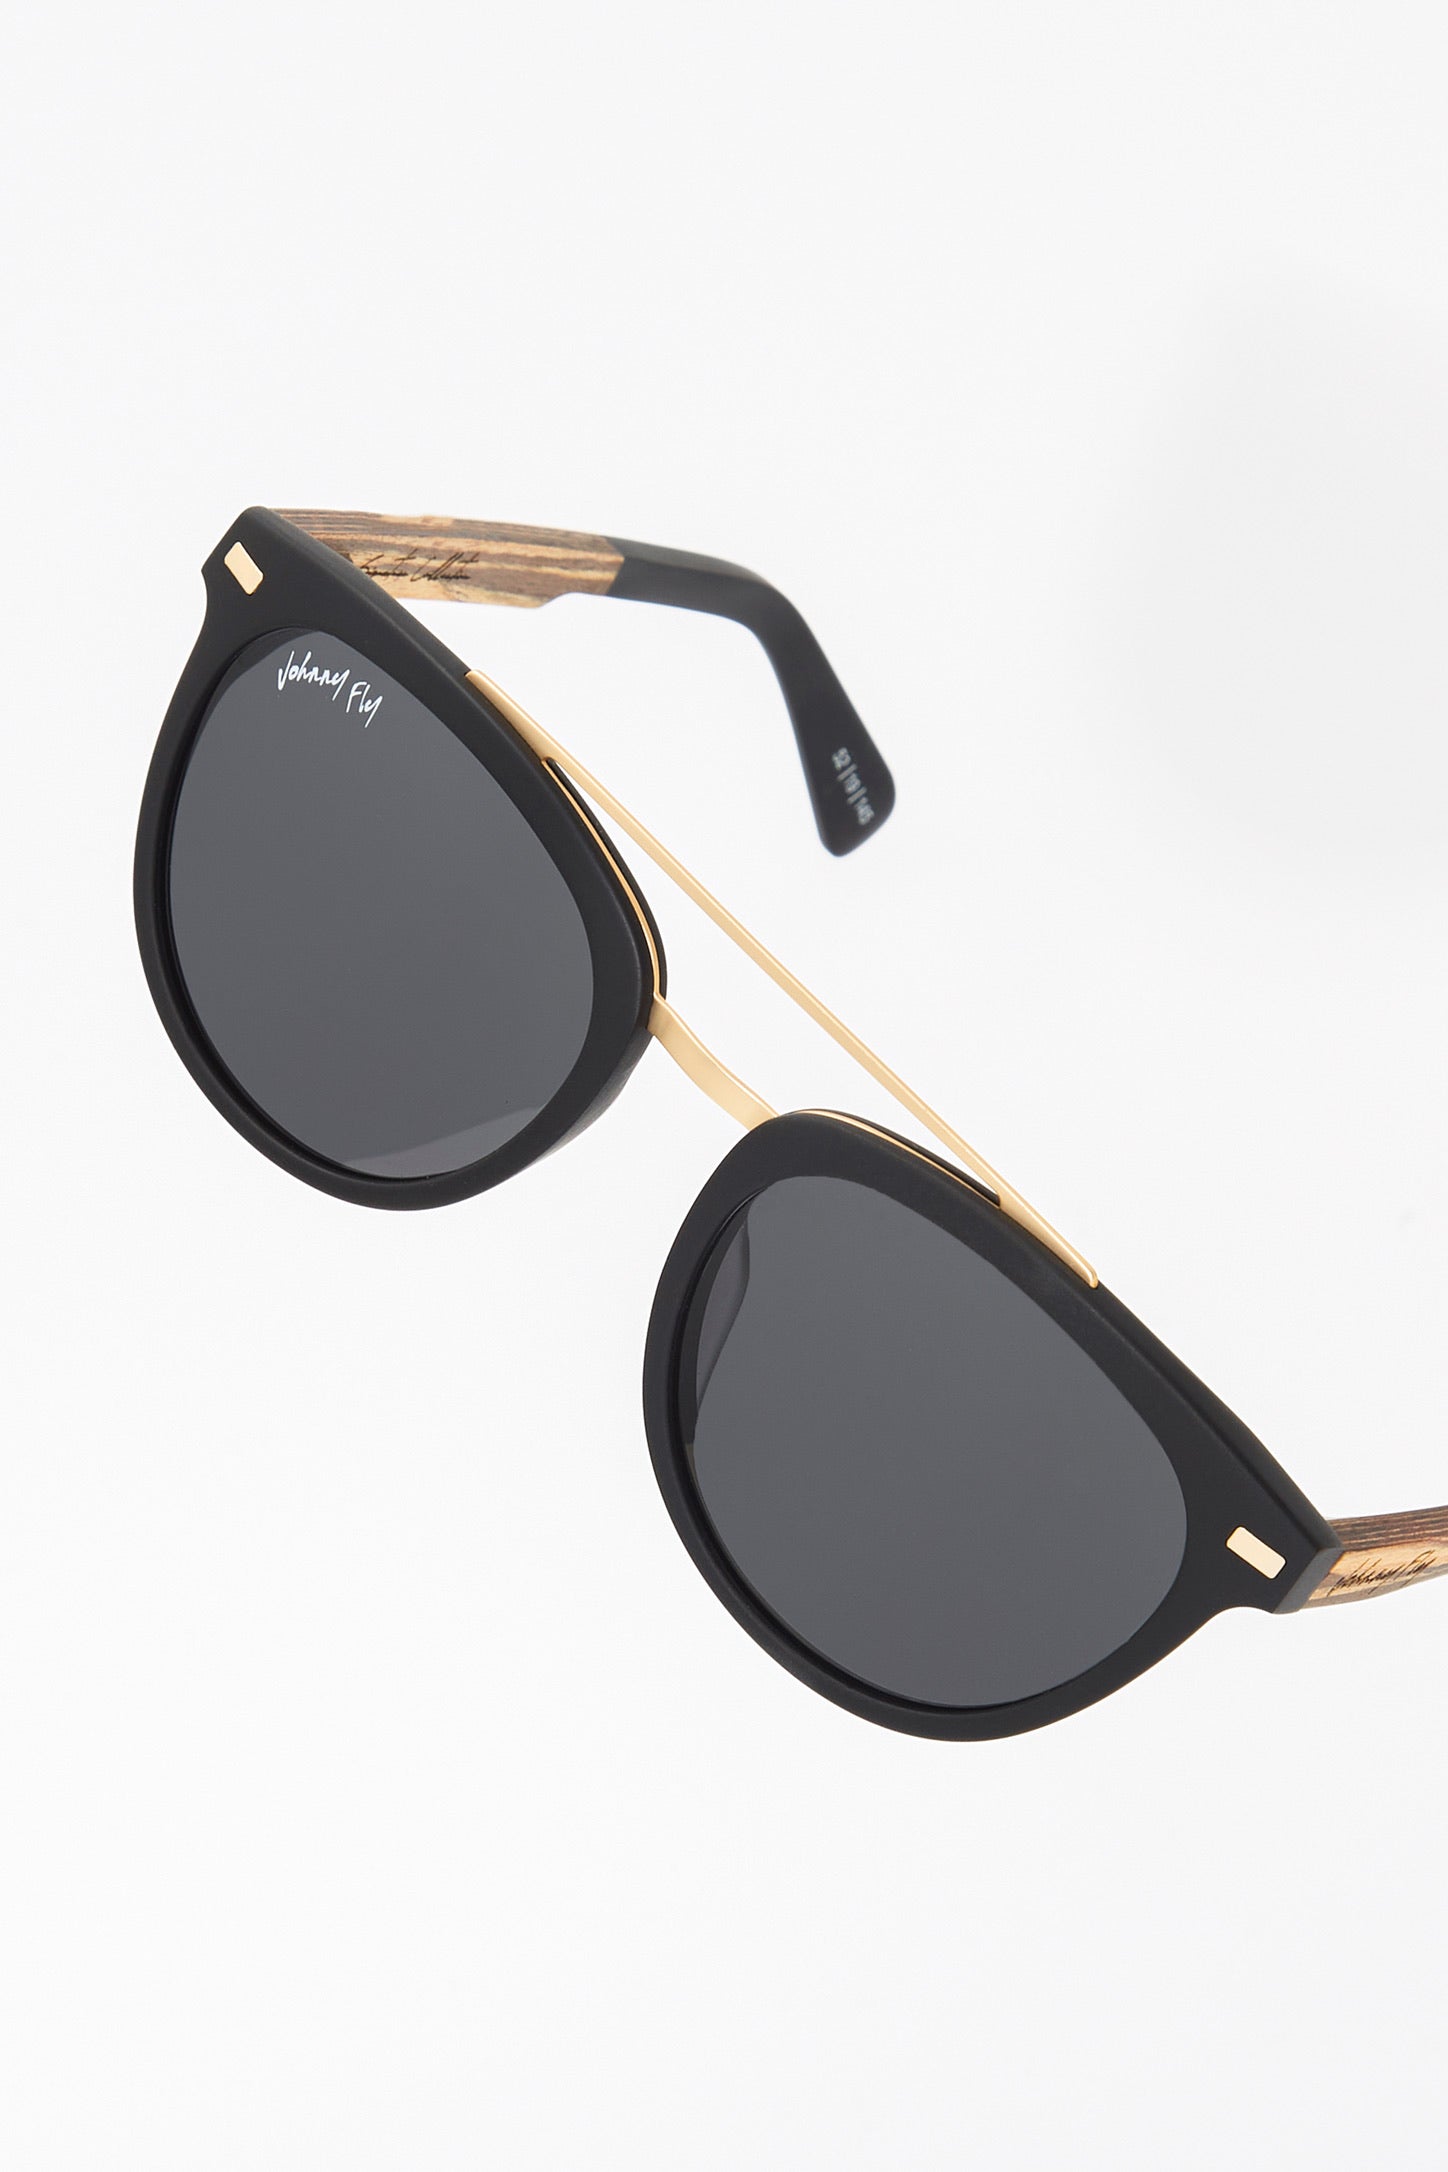 Captain MATTE BLACK Crossbar Aviator Polarized Sunglasses by Johnny Fly | Handcrafted with Acetate and Wood 